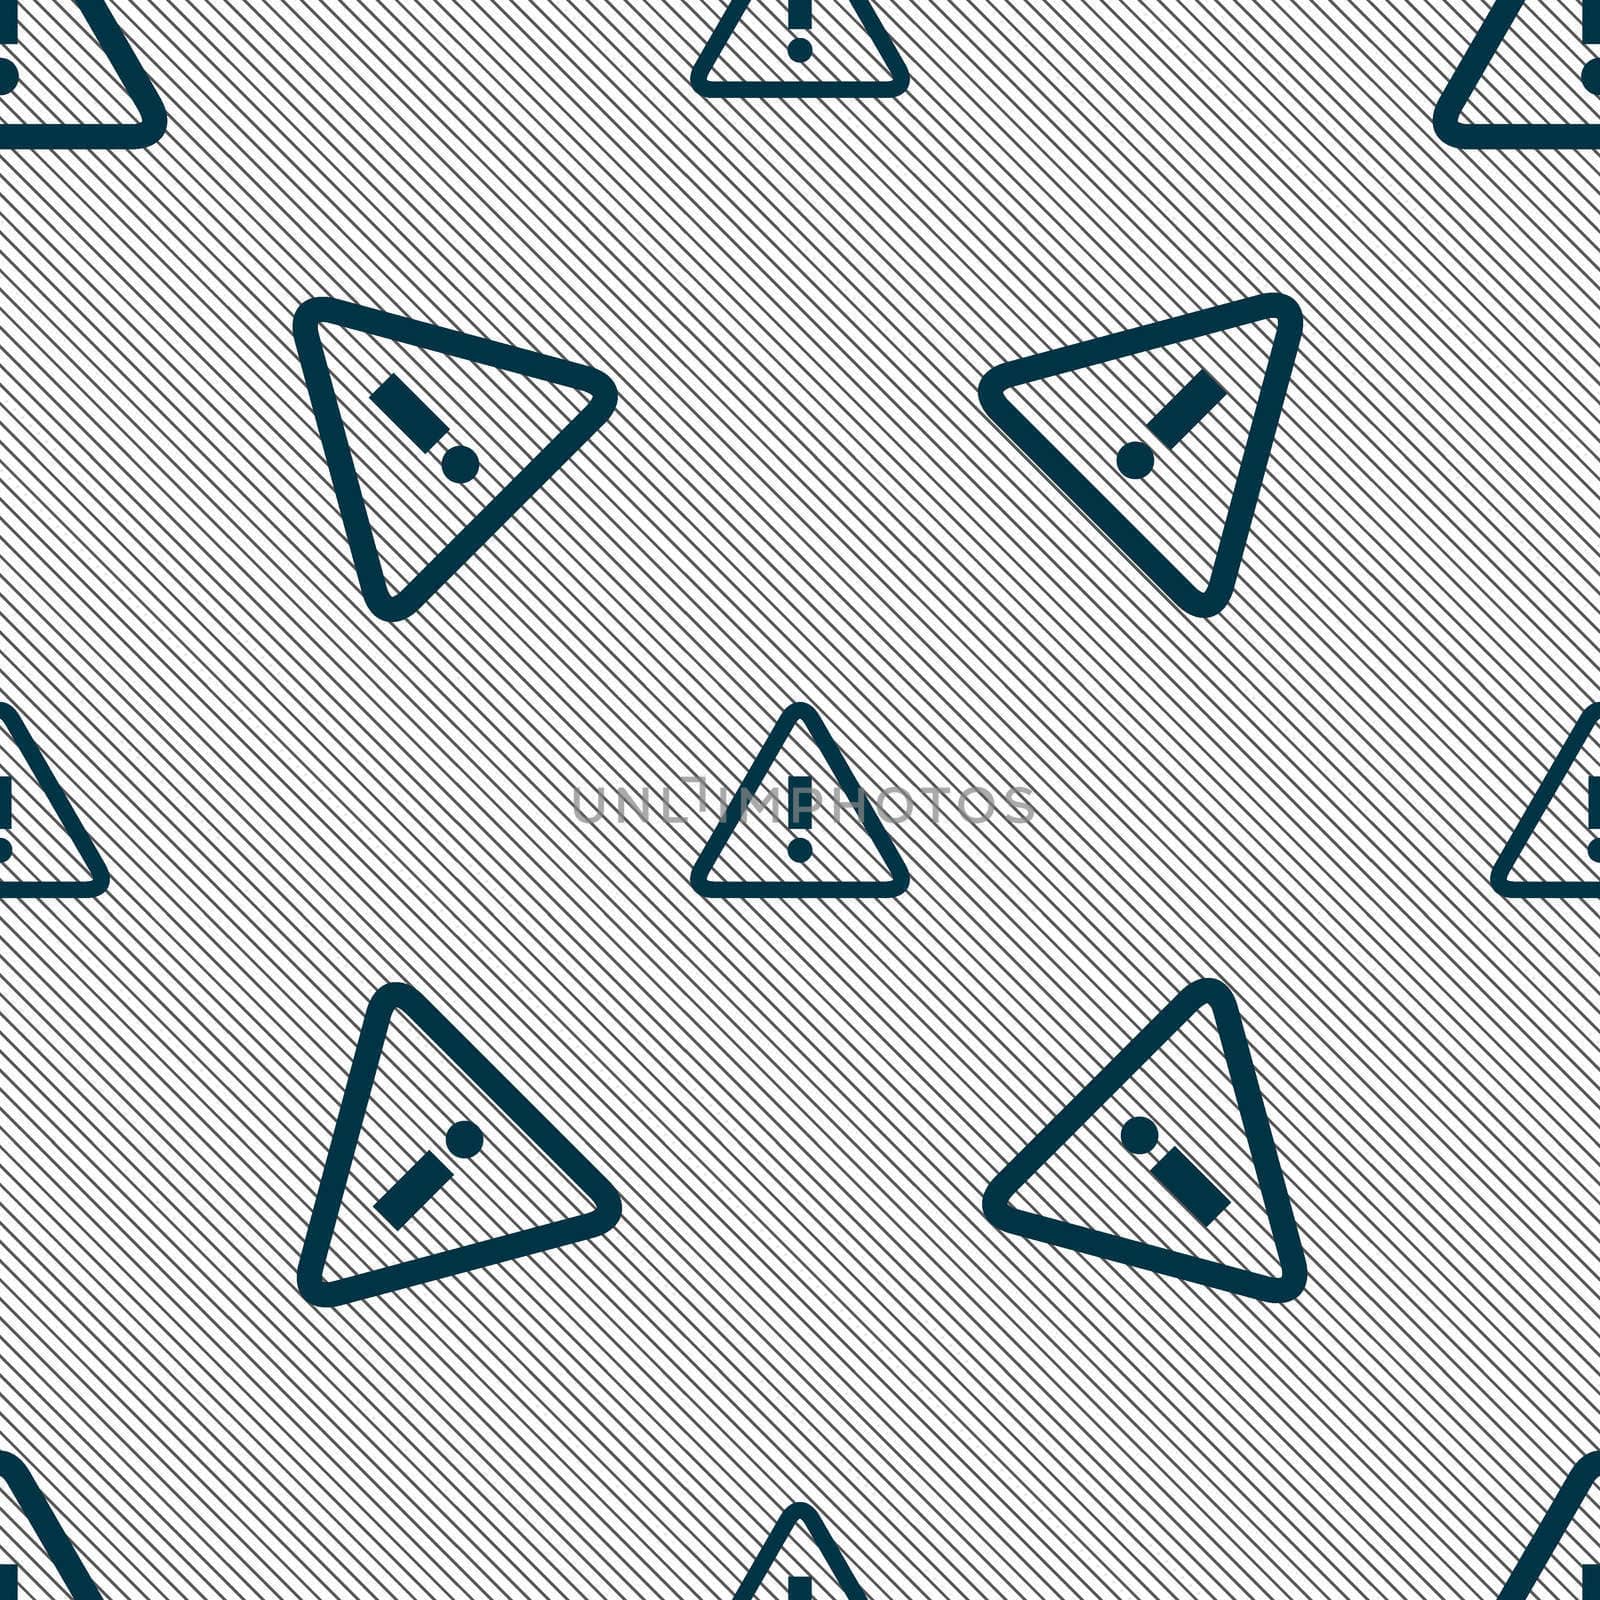 Attention caution sign icon. Exclamation mark. Hazard warning symbol. Seamless pattern with geometric texture. illustration